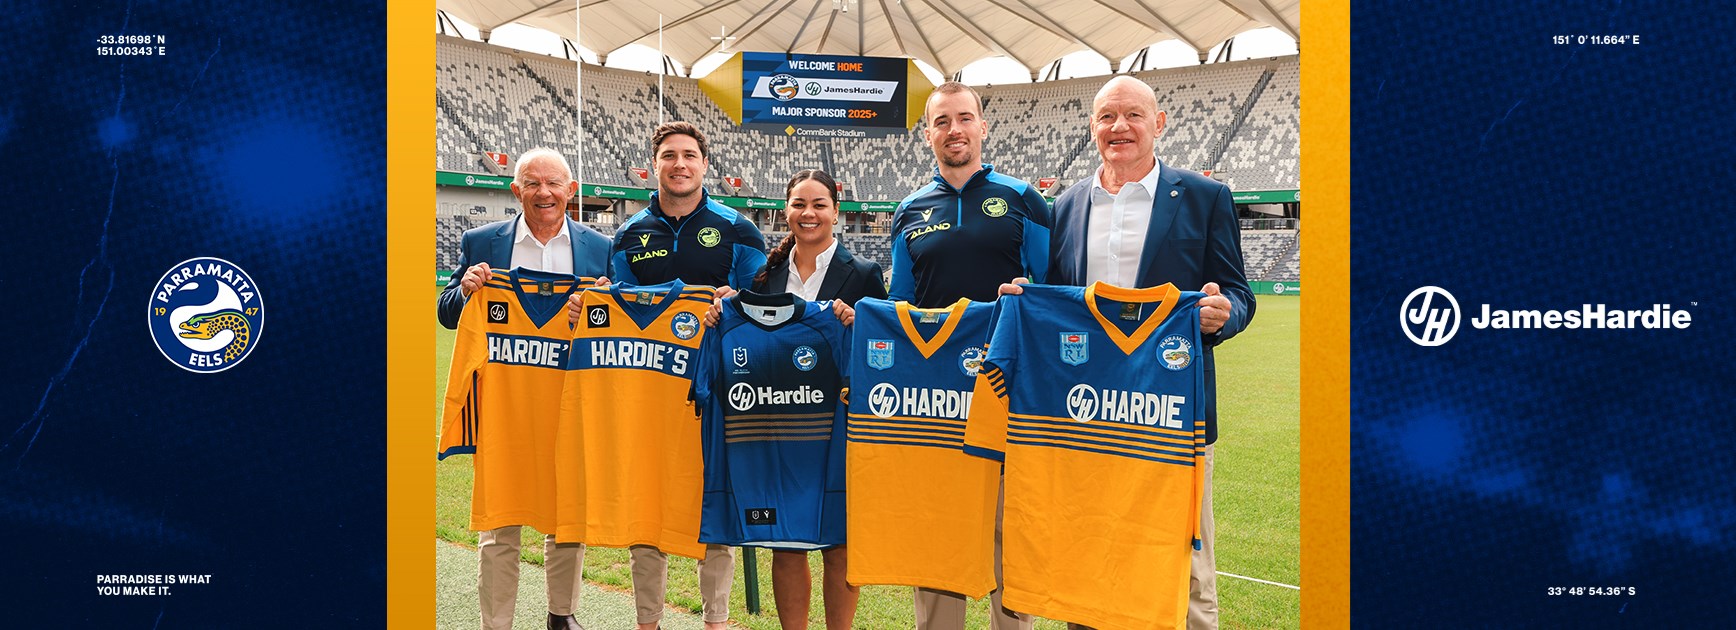 Welcome Home. James Hardie to return as Club’s Major Sponsor from 2025